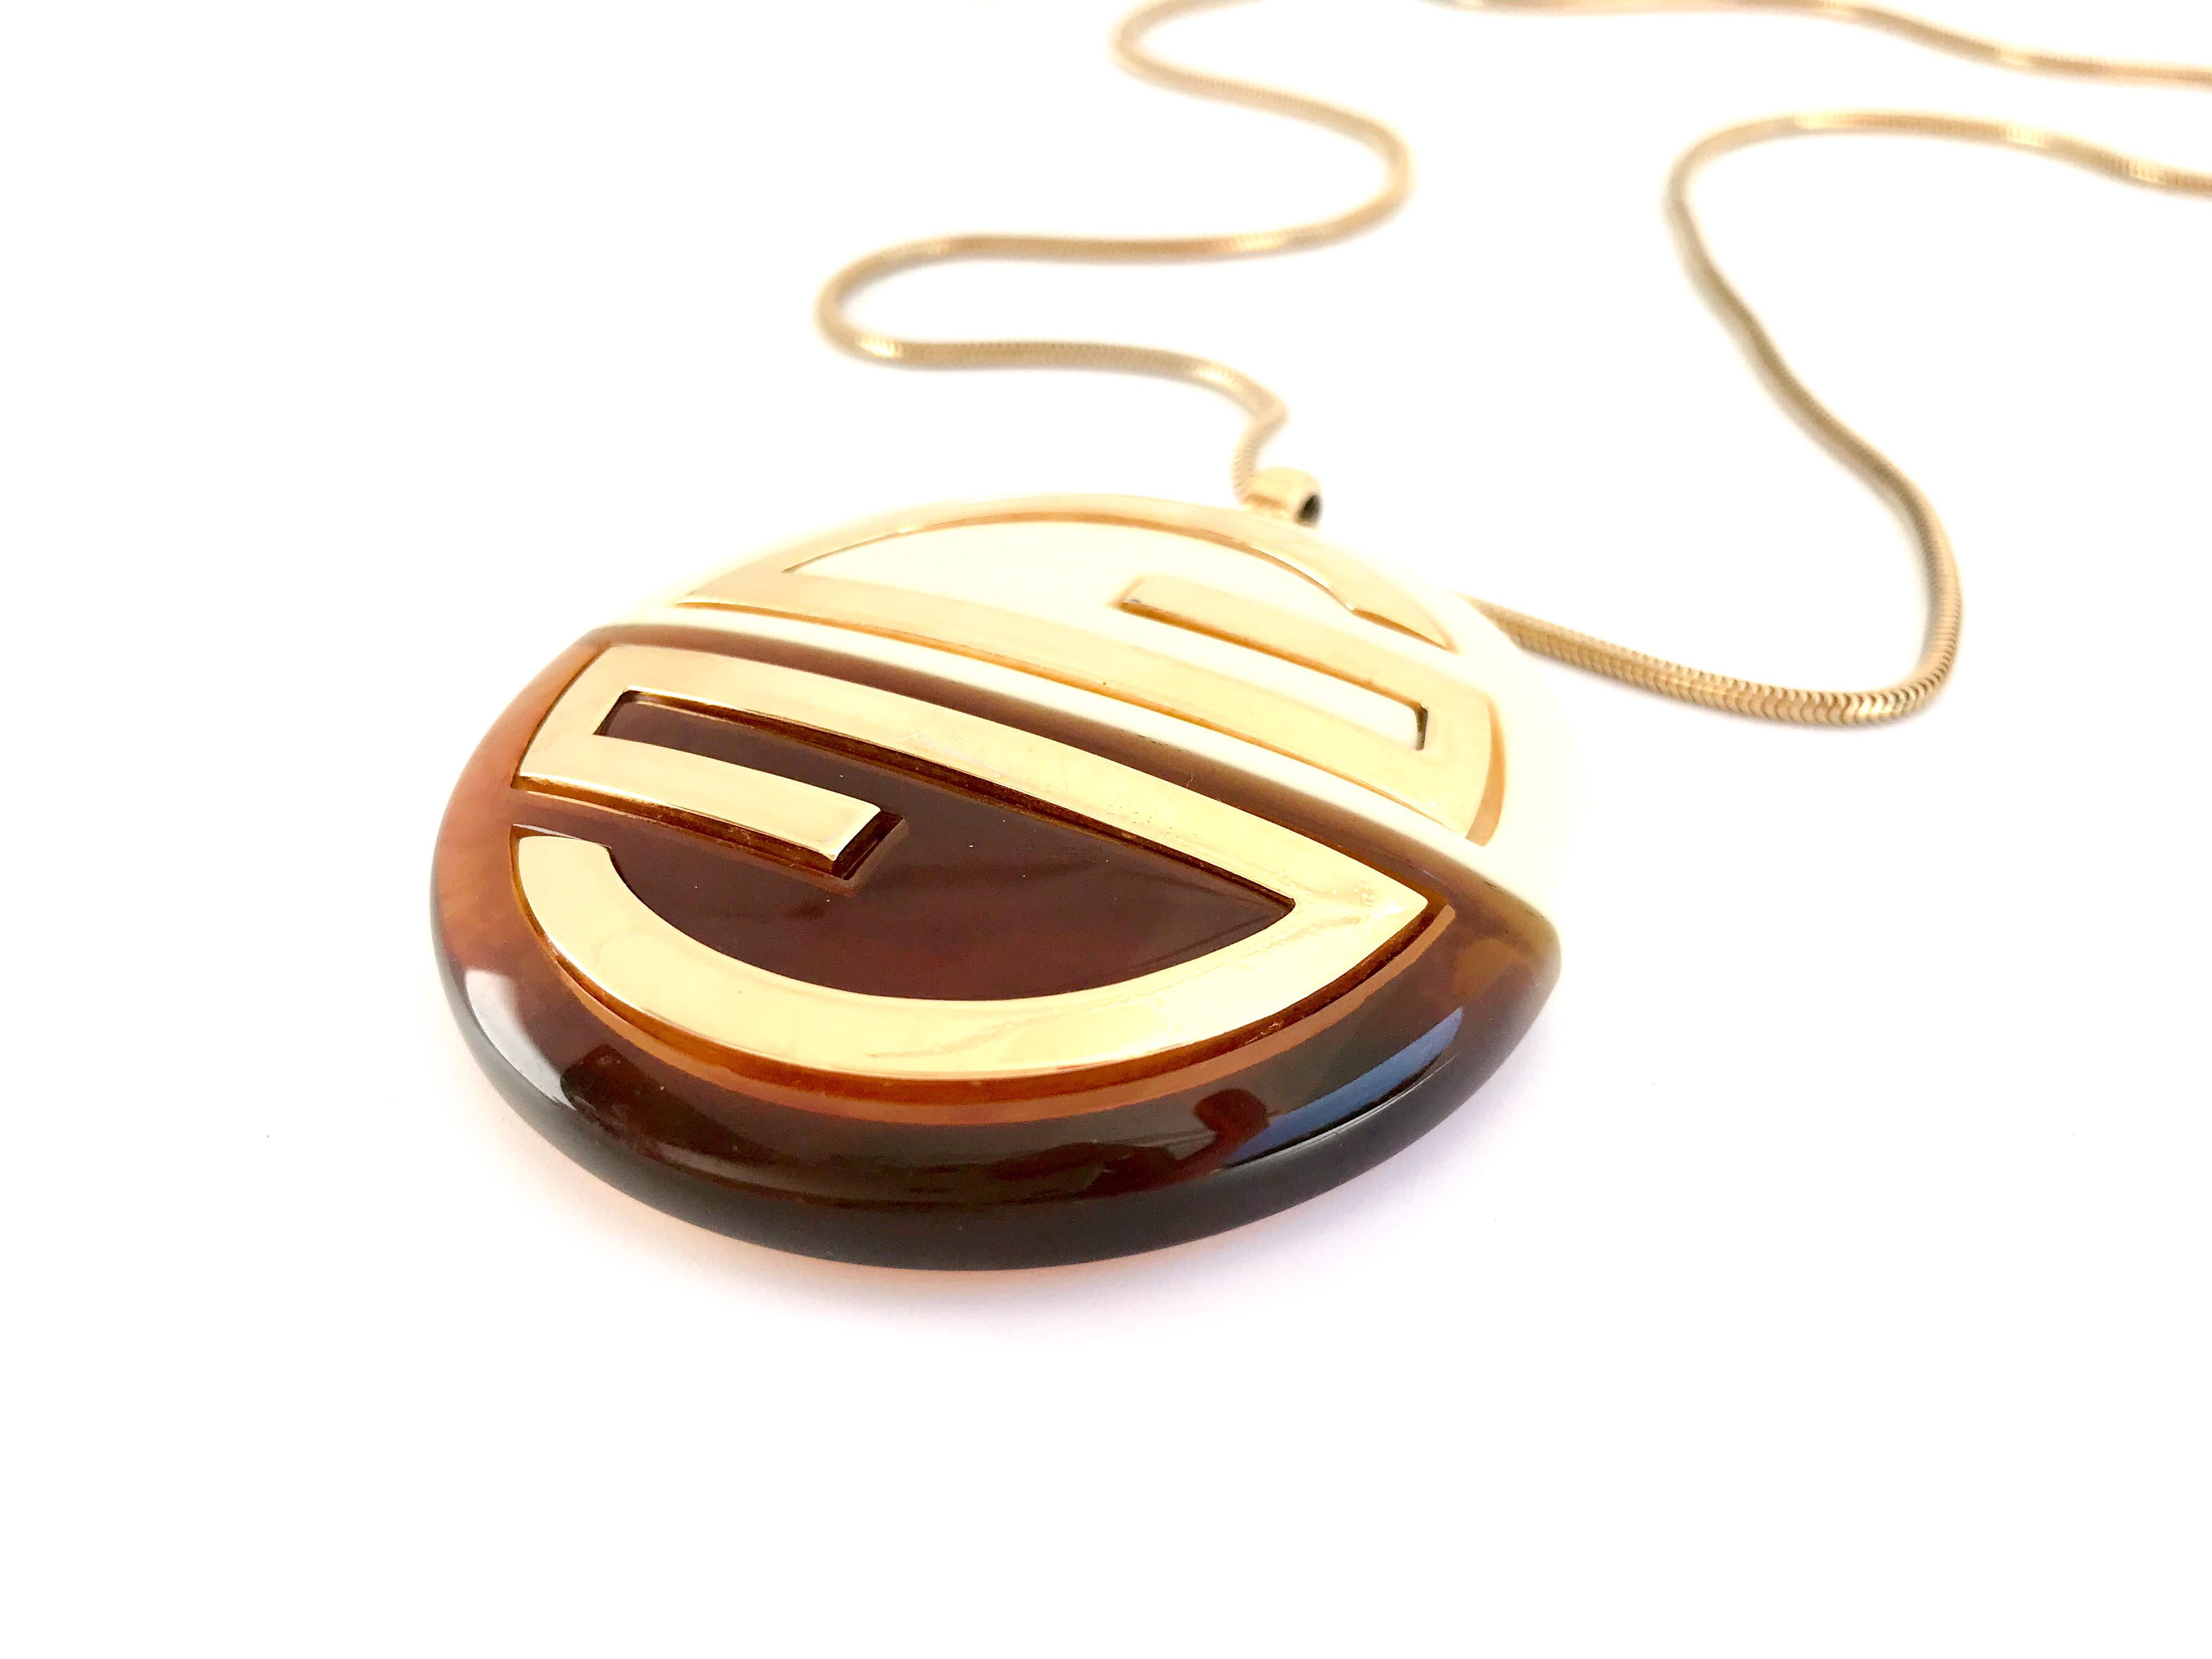 Givenchy 1970s Vintage Large Statement Pendant Necklace 

Beautiful snake chain made of gold tone metal and large lucite pendant with iconic Givenchy logo embossed in gold metal.

Pendant measures 2.5 inches across
Chain is 27 inches long

Chain and